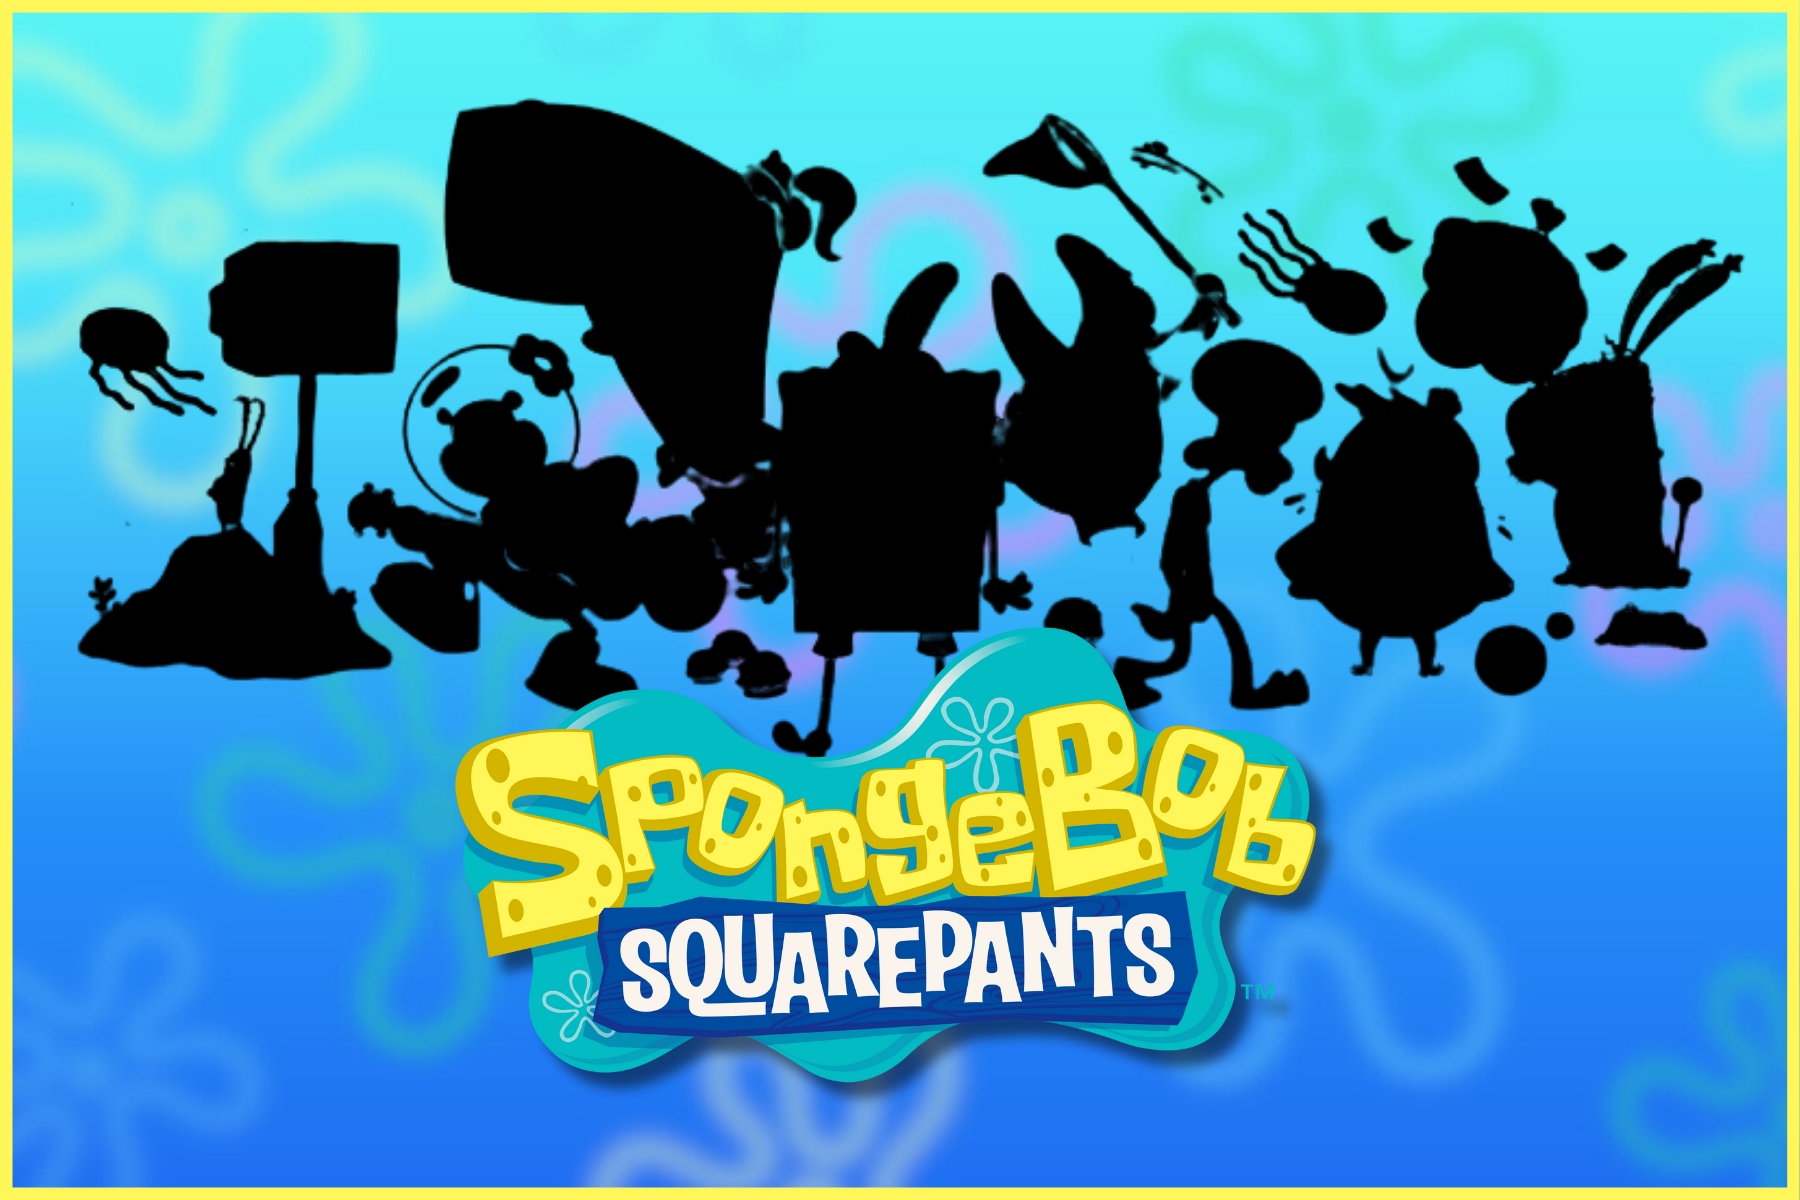 SpongeBob Quiz: Guess the Character by Their Silhouette